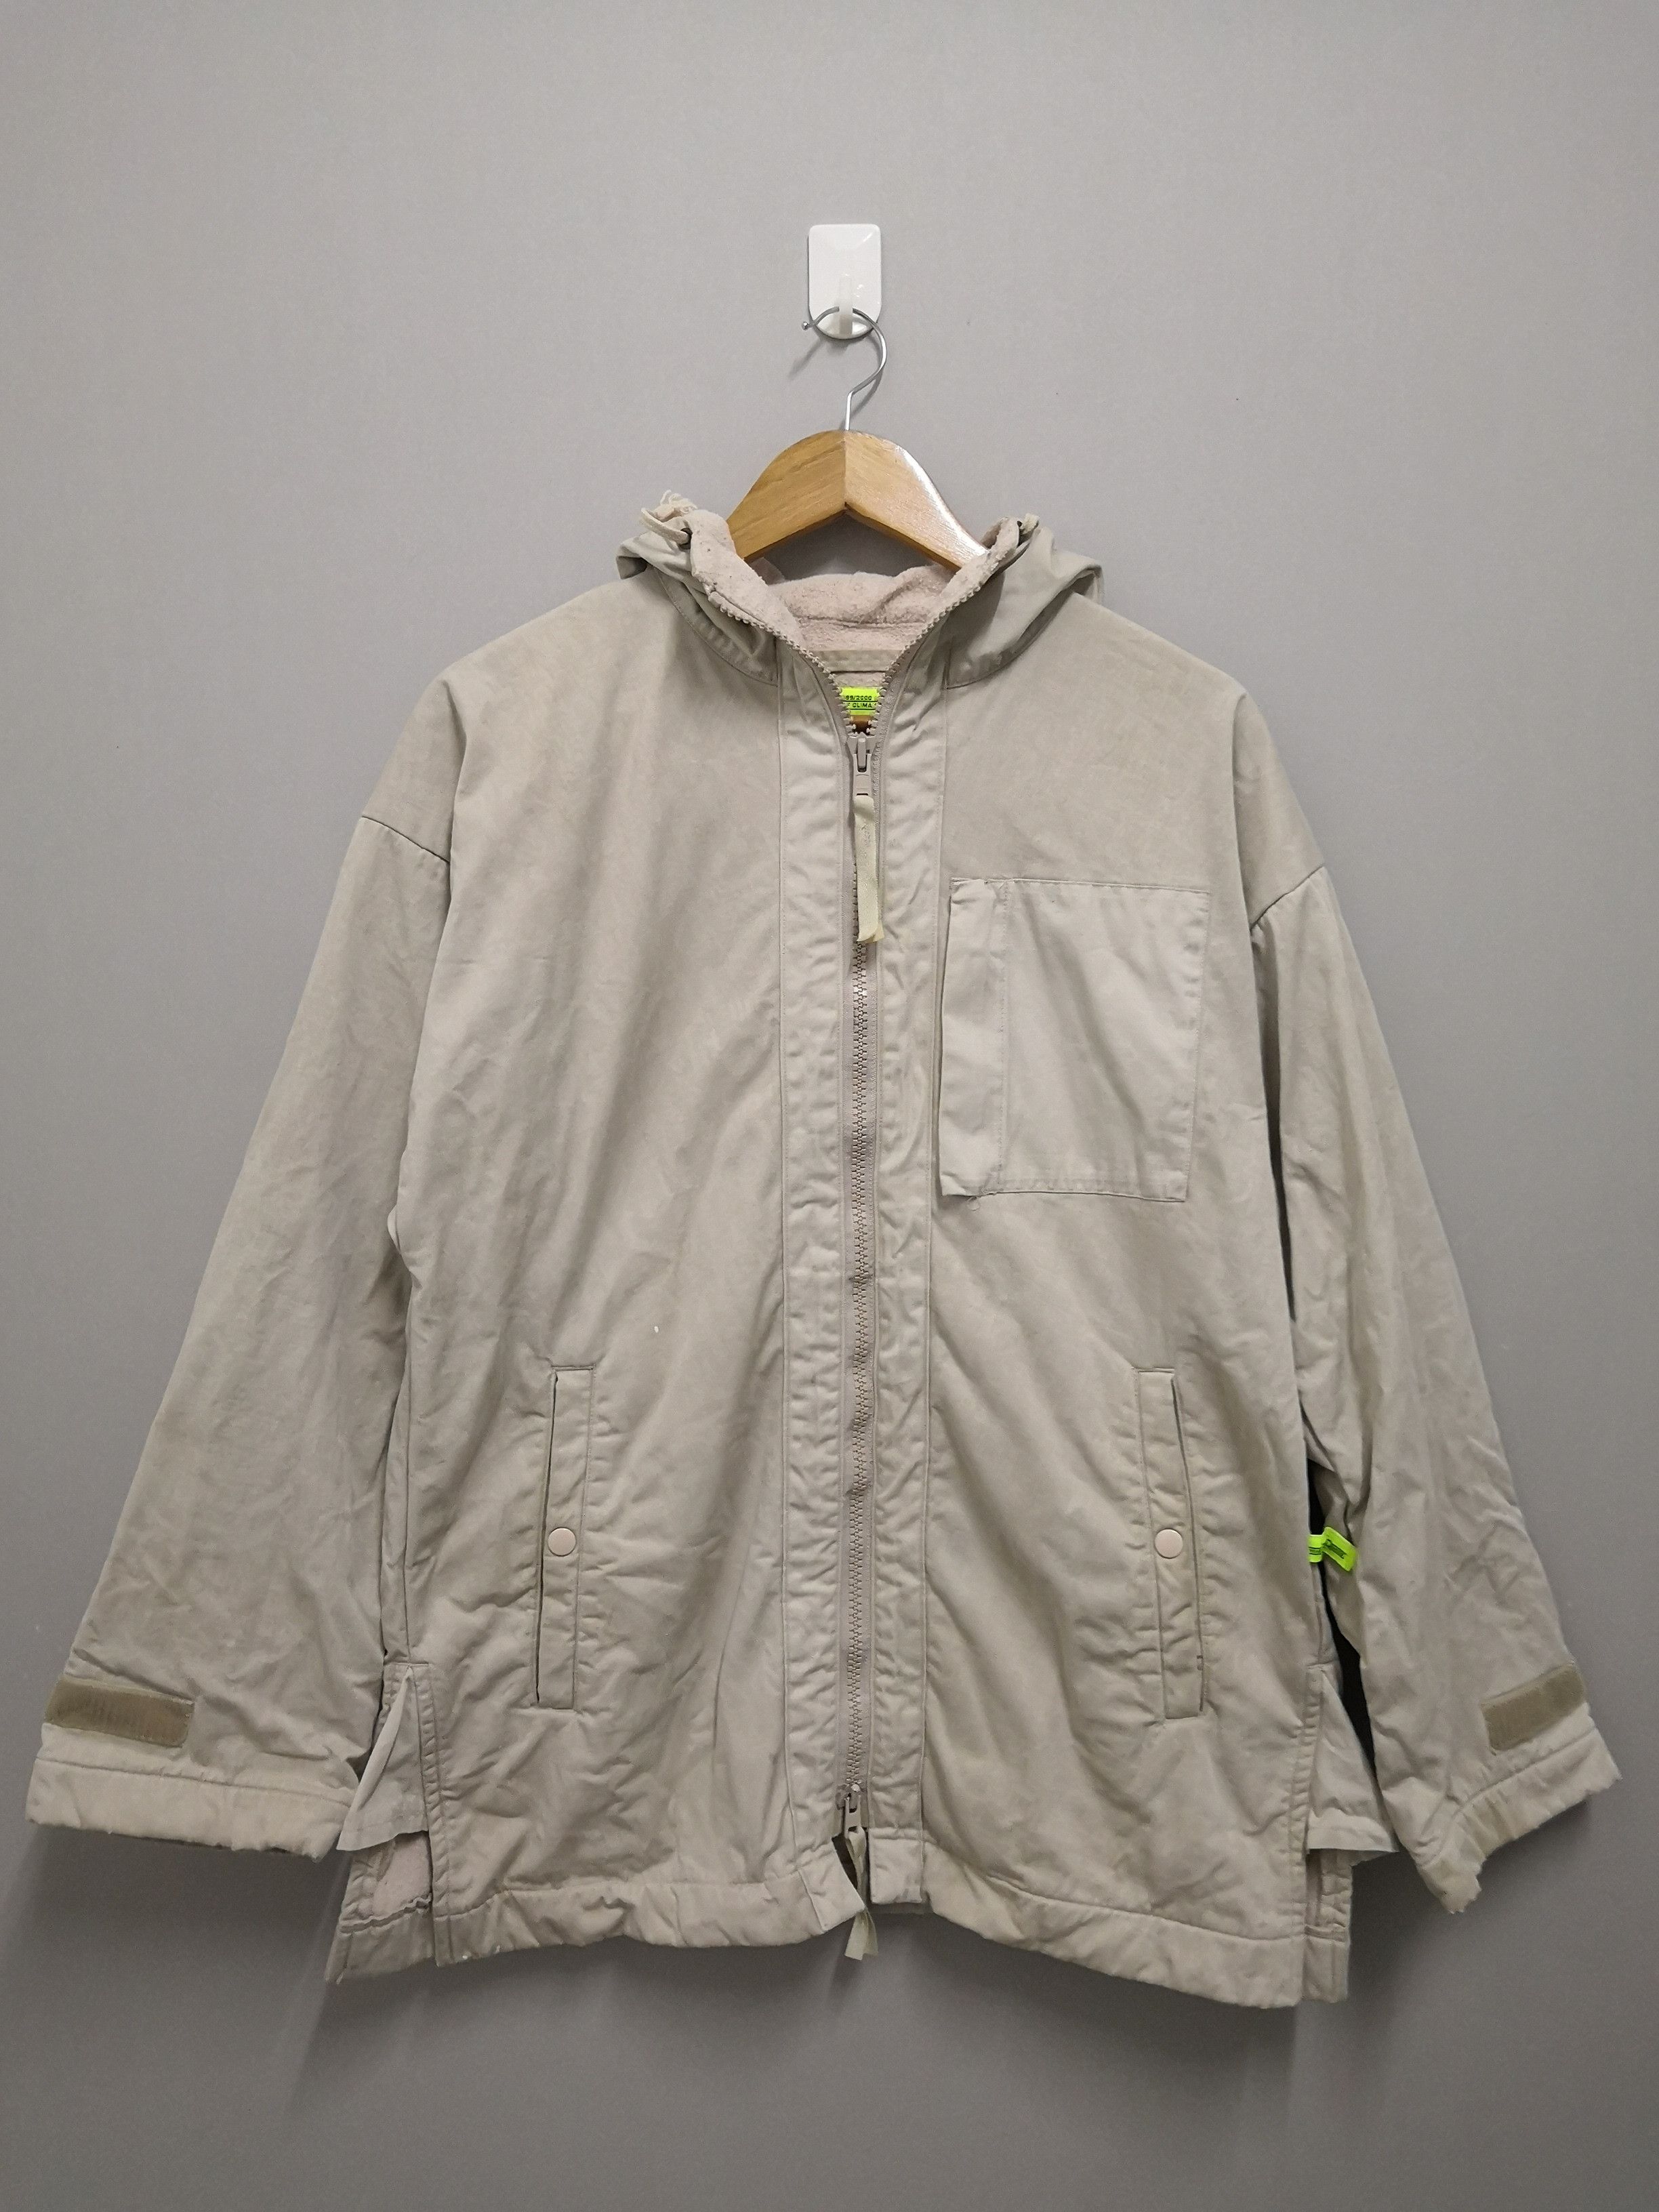 Issey Miyake - Zucca Year Of Climax 1999/2000 Hooded Jacket - 1